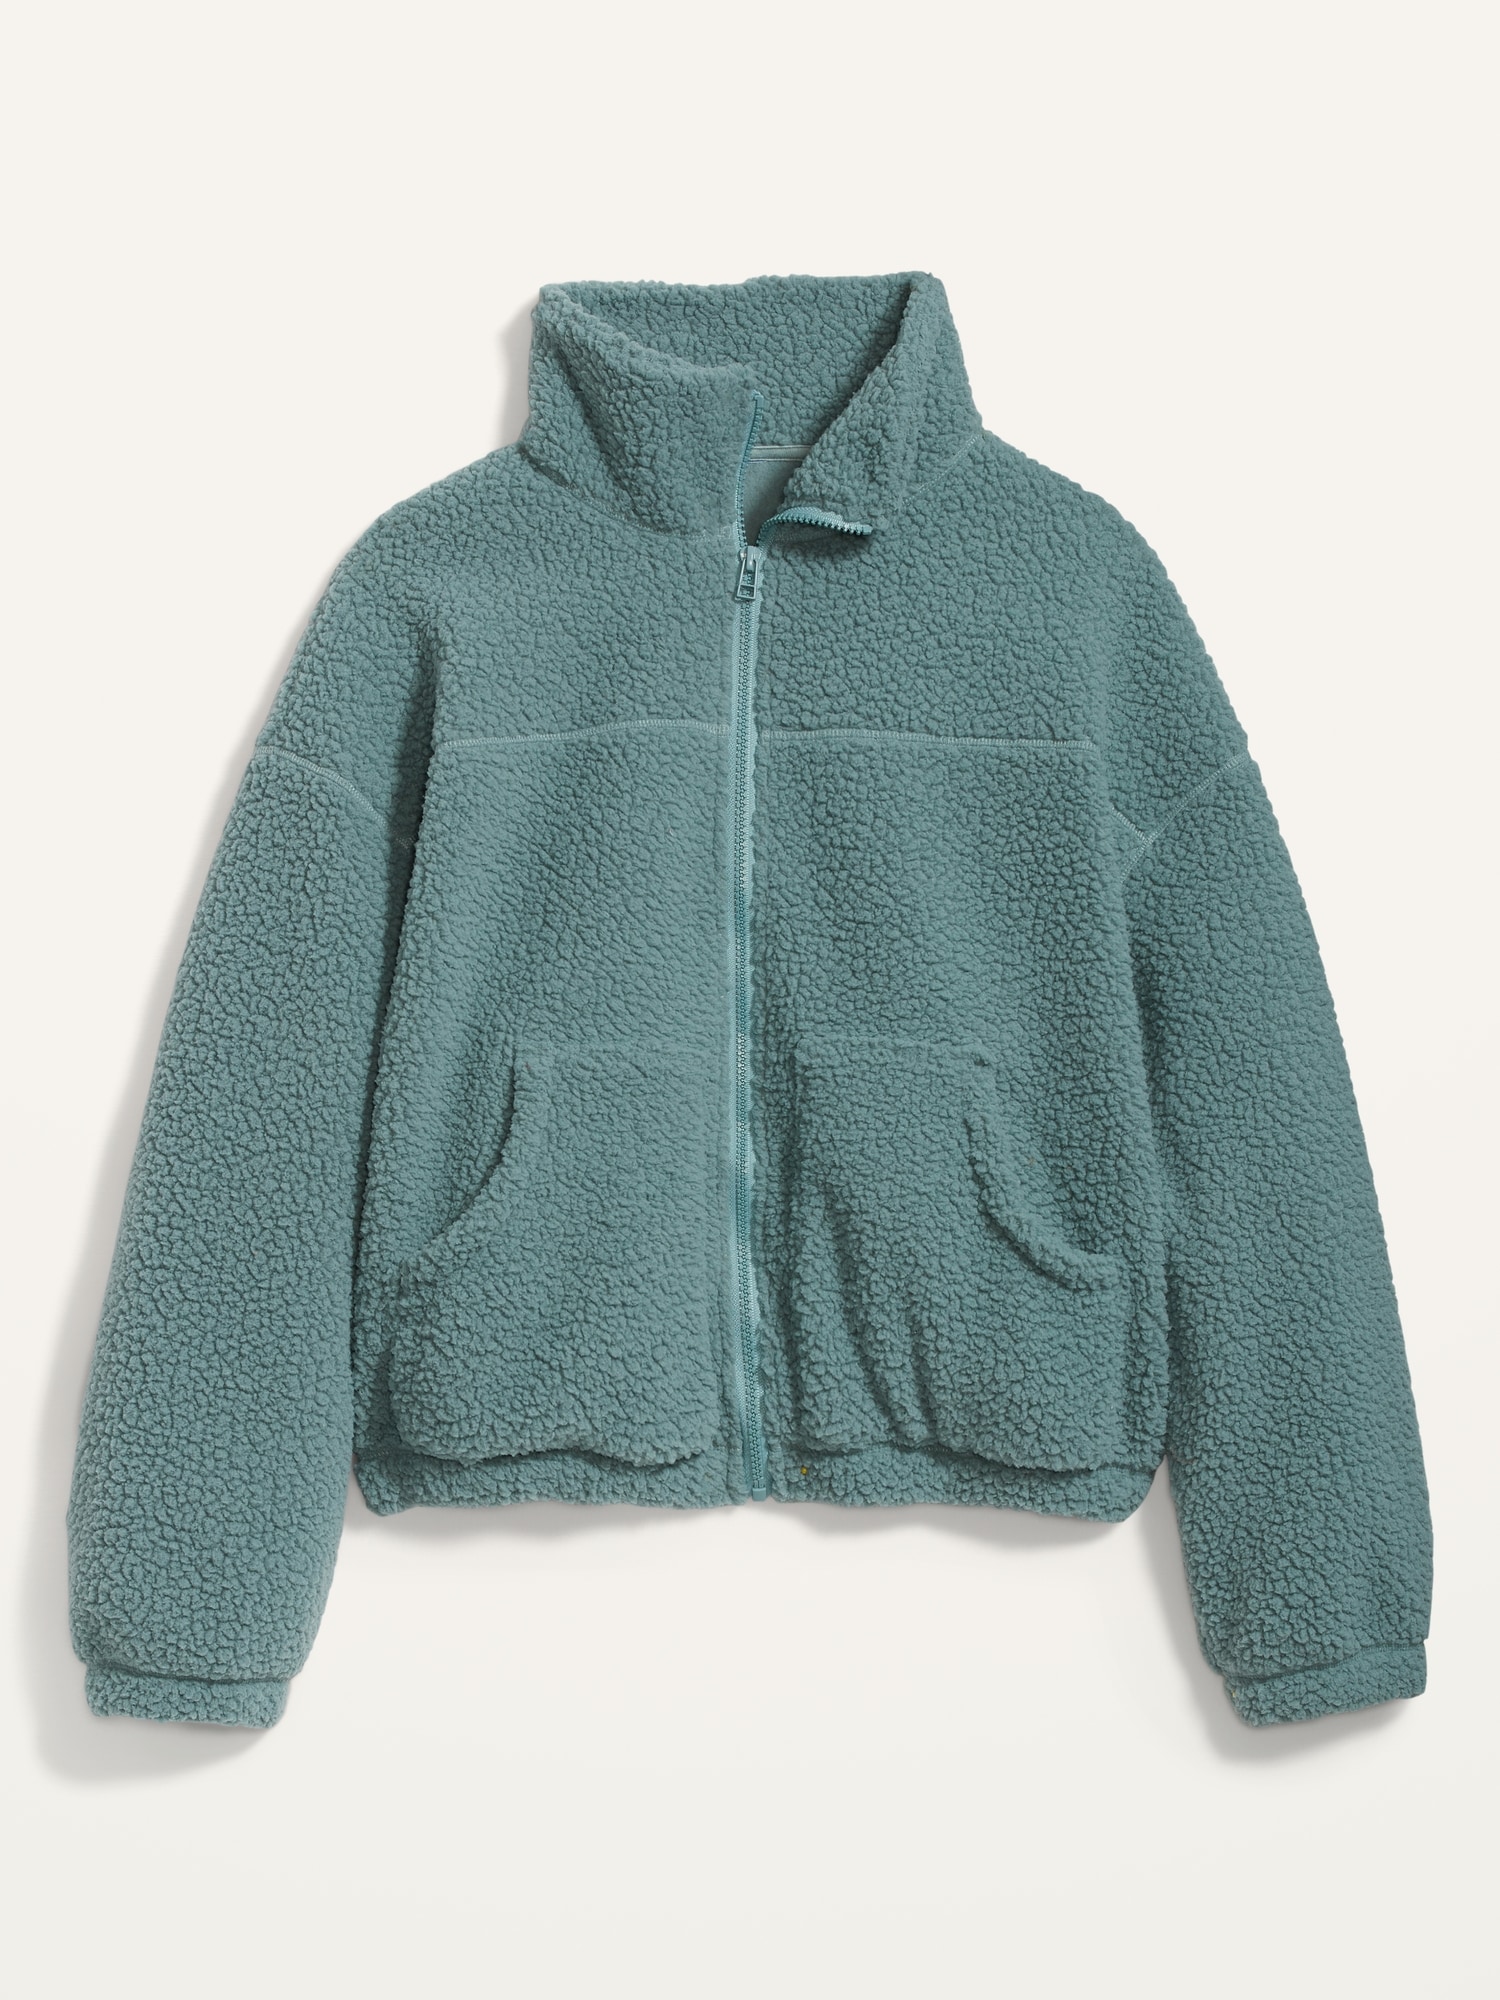 Slouchy Sherpa Zip Jacket for Women | Old Navy